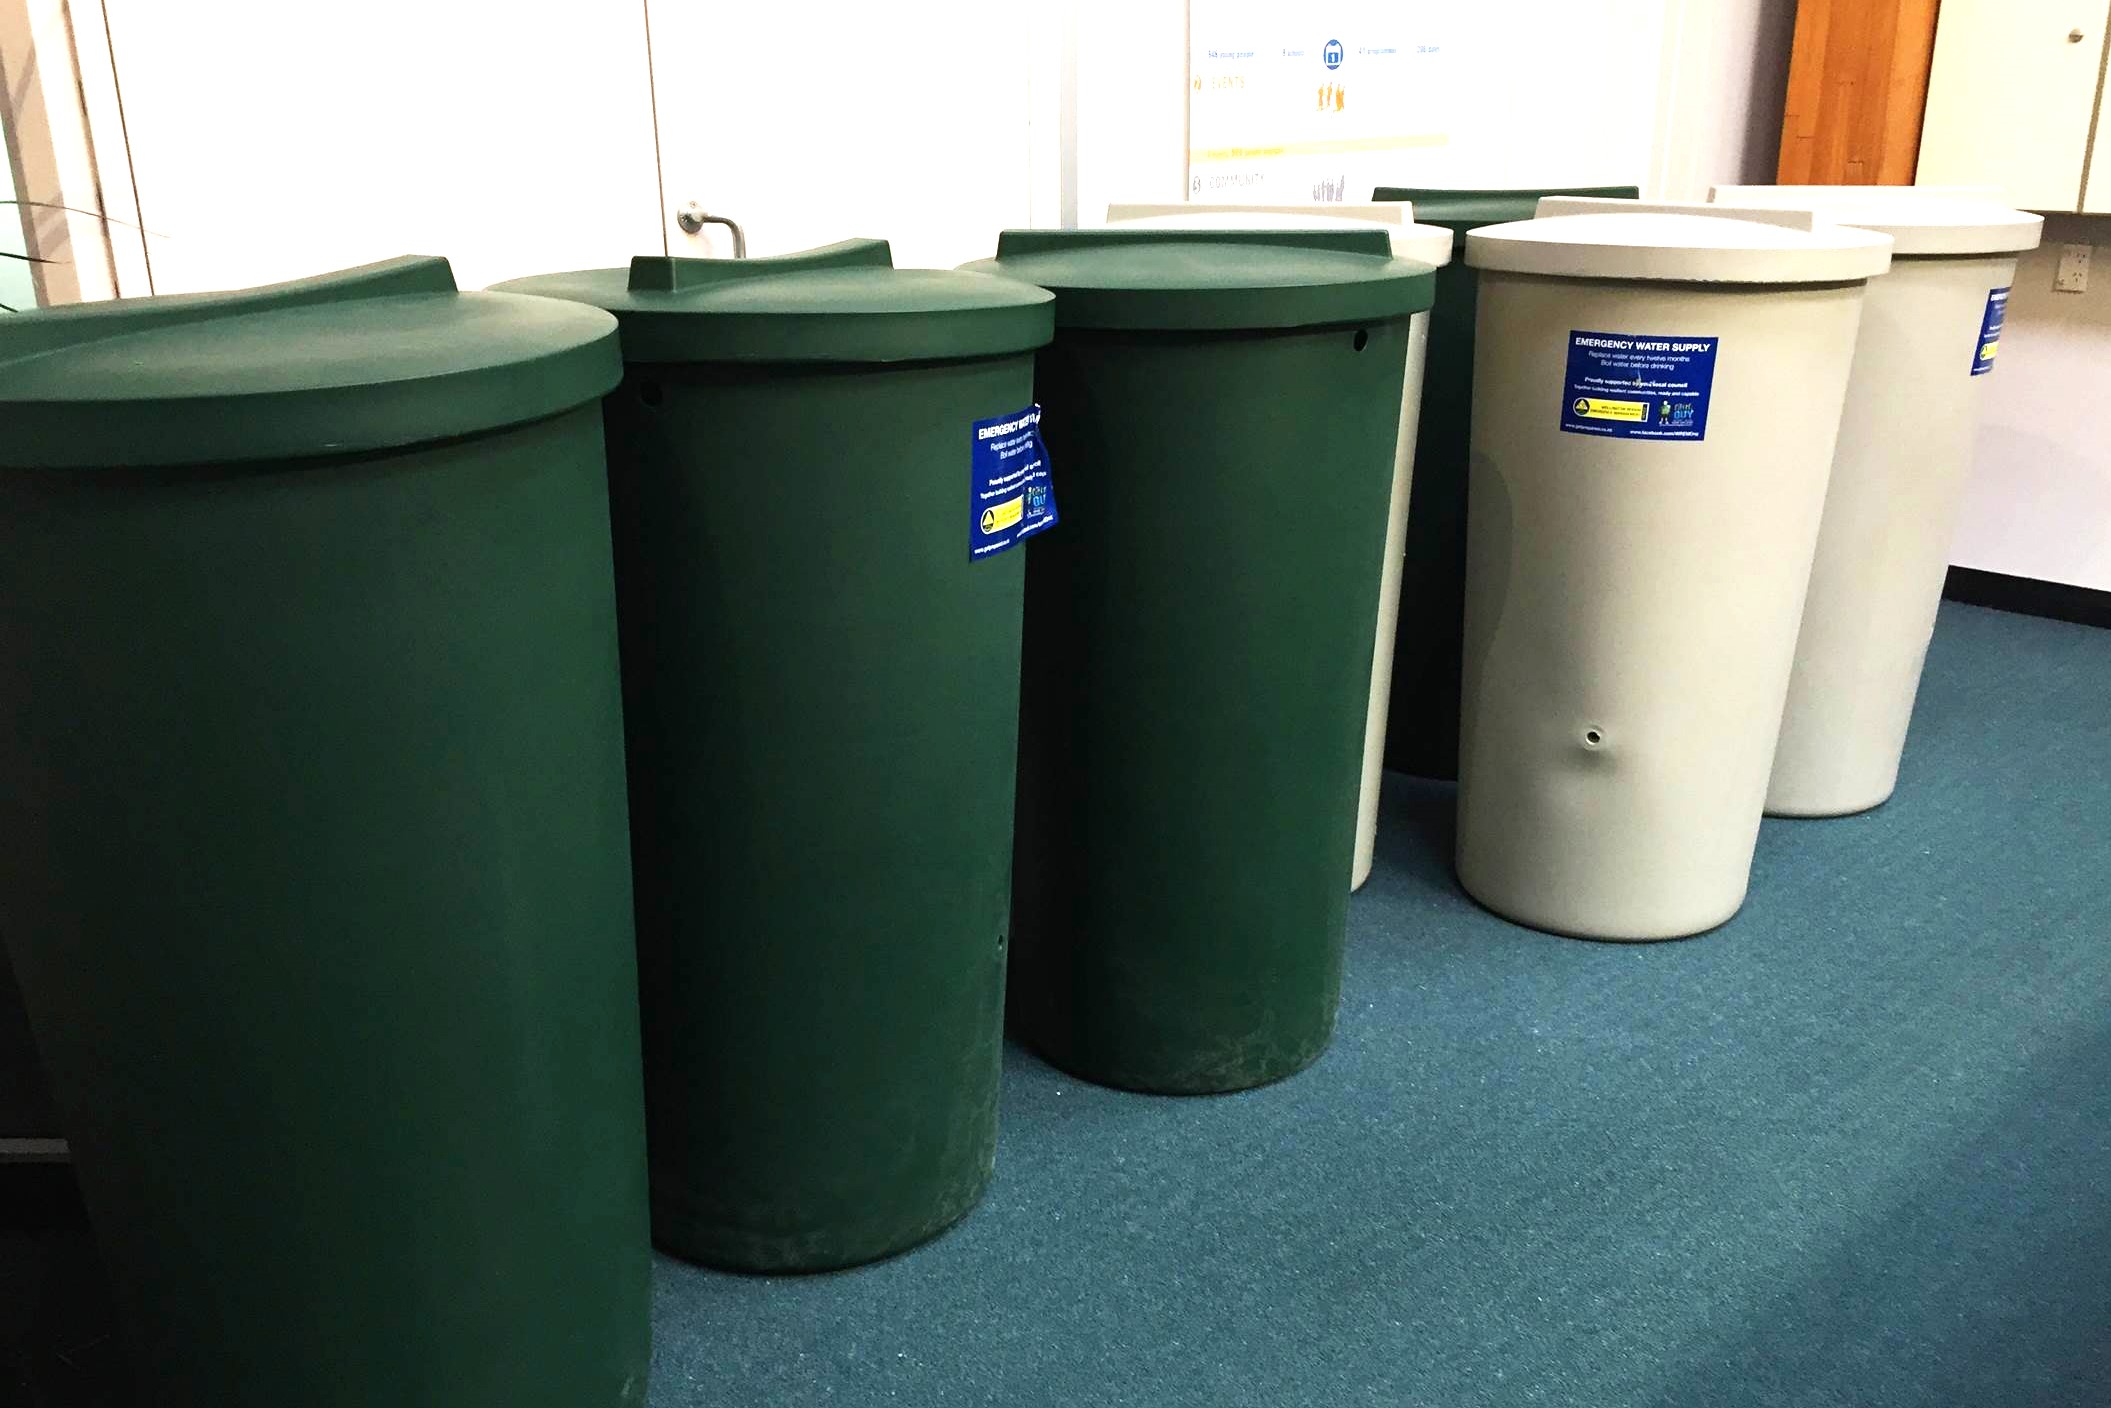 A collection of green and white emergency rainwater collection tanks.